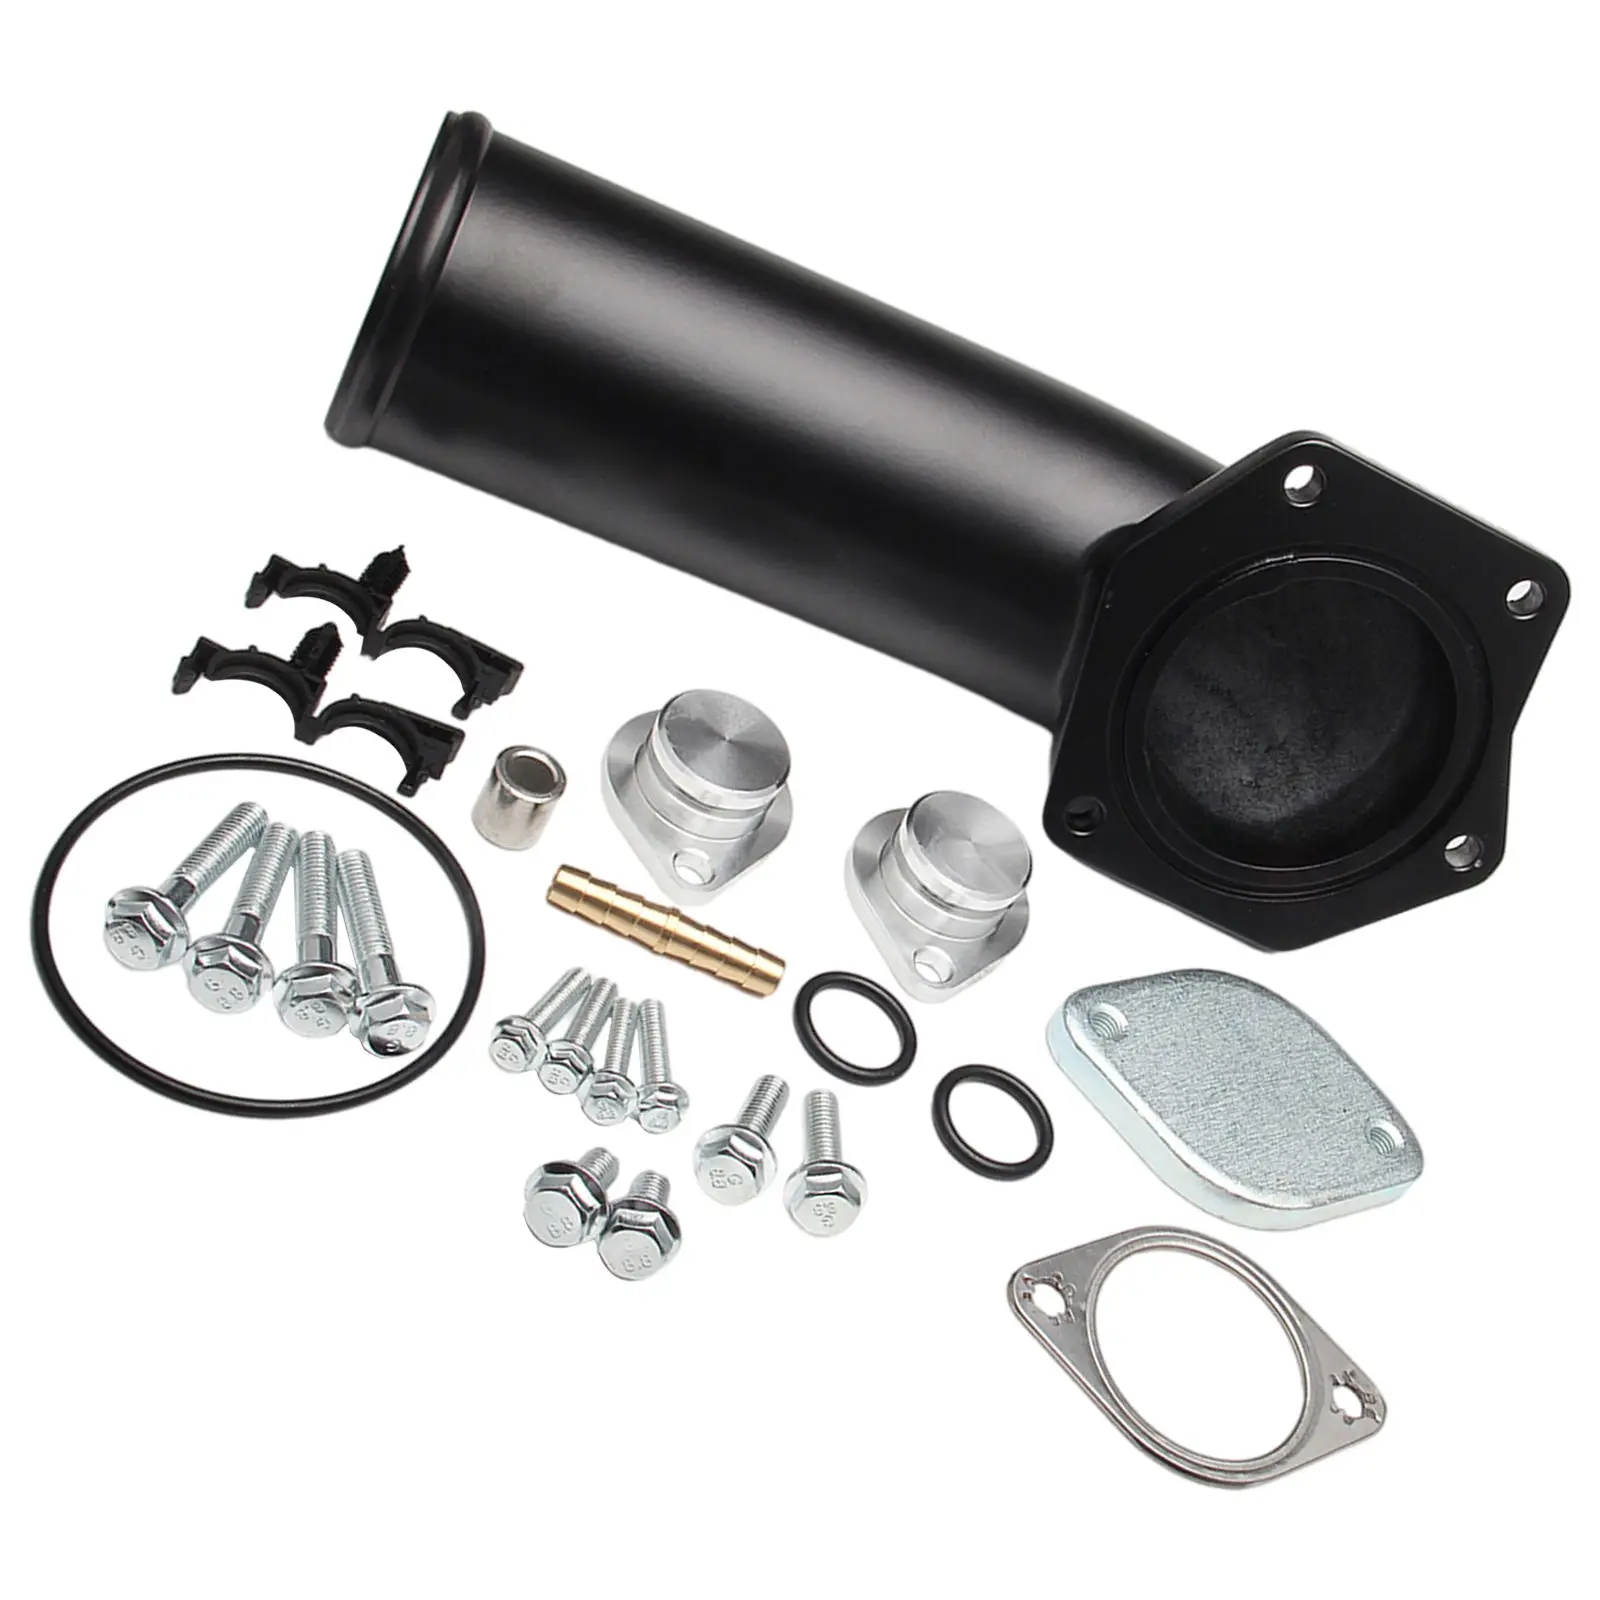 Intake Elbow Pipe Repalcement 6.4L High Flow Black Powerstroke 391Ci Parts 2008-2010 Valve Kit for Ford Super Duty